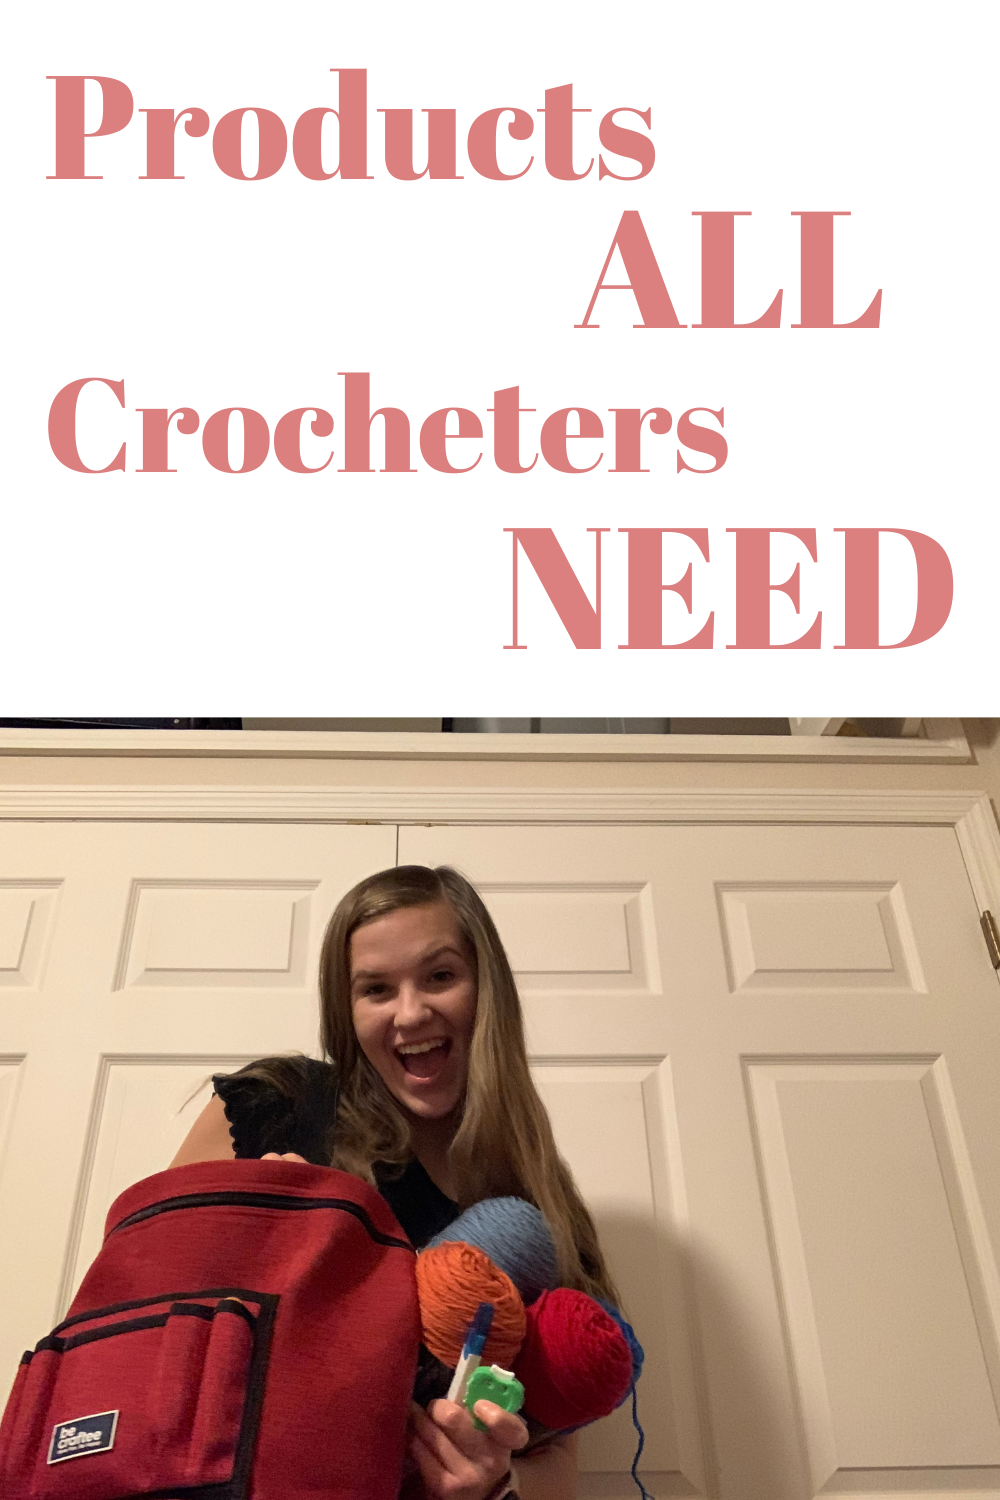 Products crocheters NEED/ Gift ideas for any yarn lover!